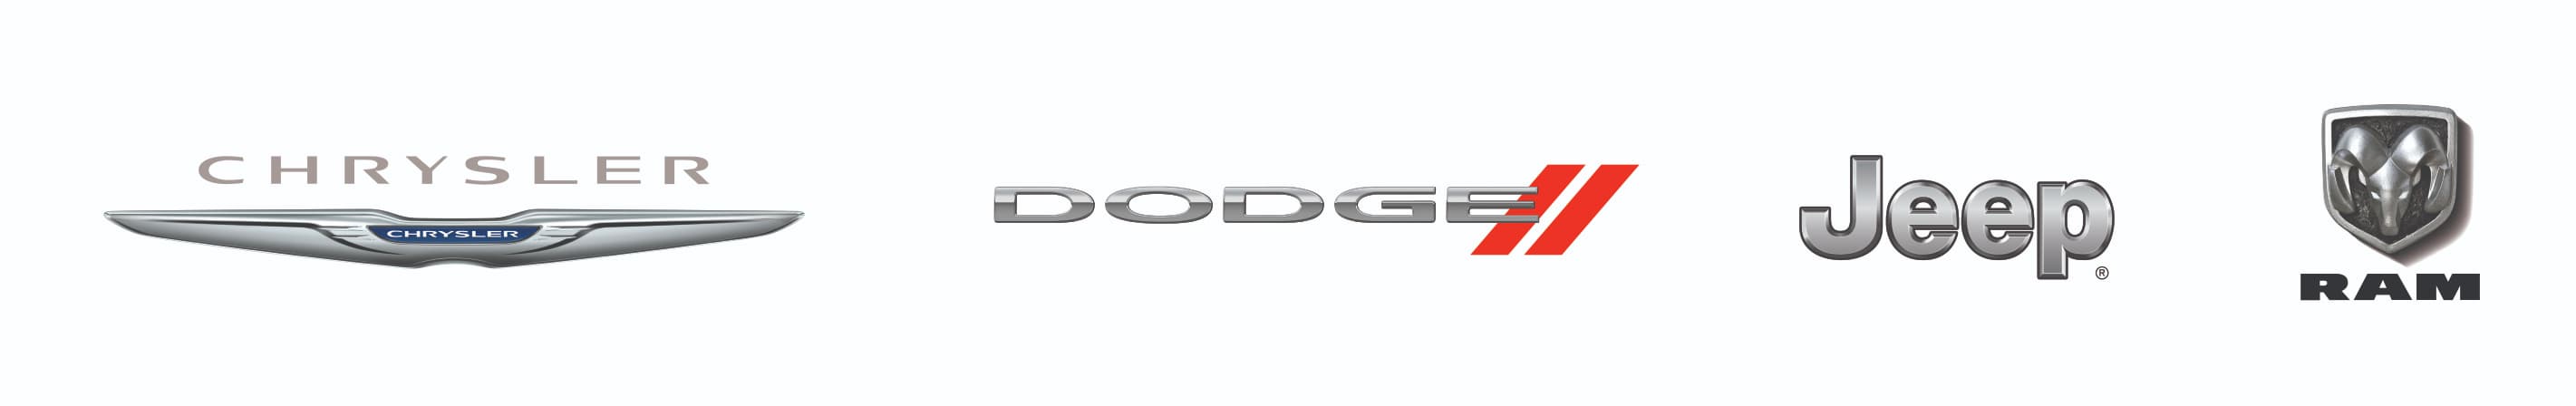 Chrysler Dodge Jeep RAM In Arlington Heights, IL